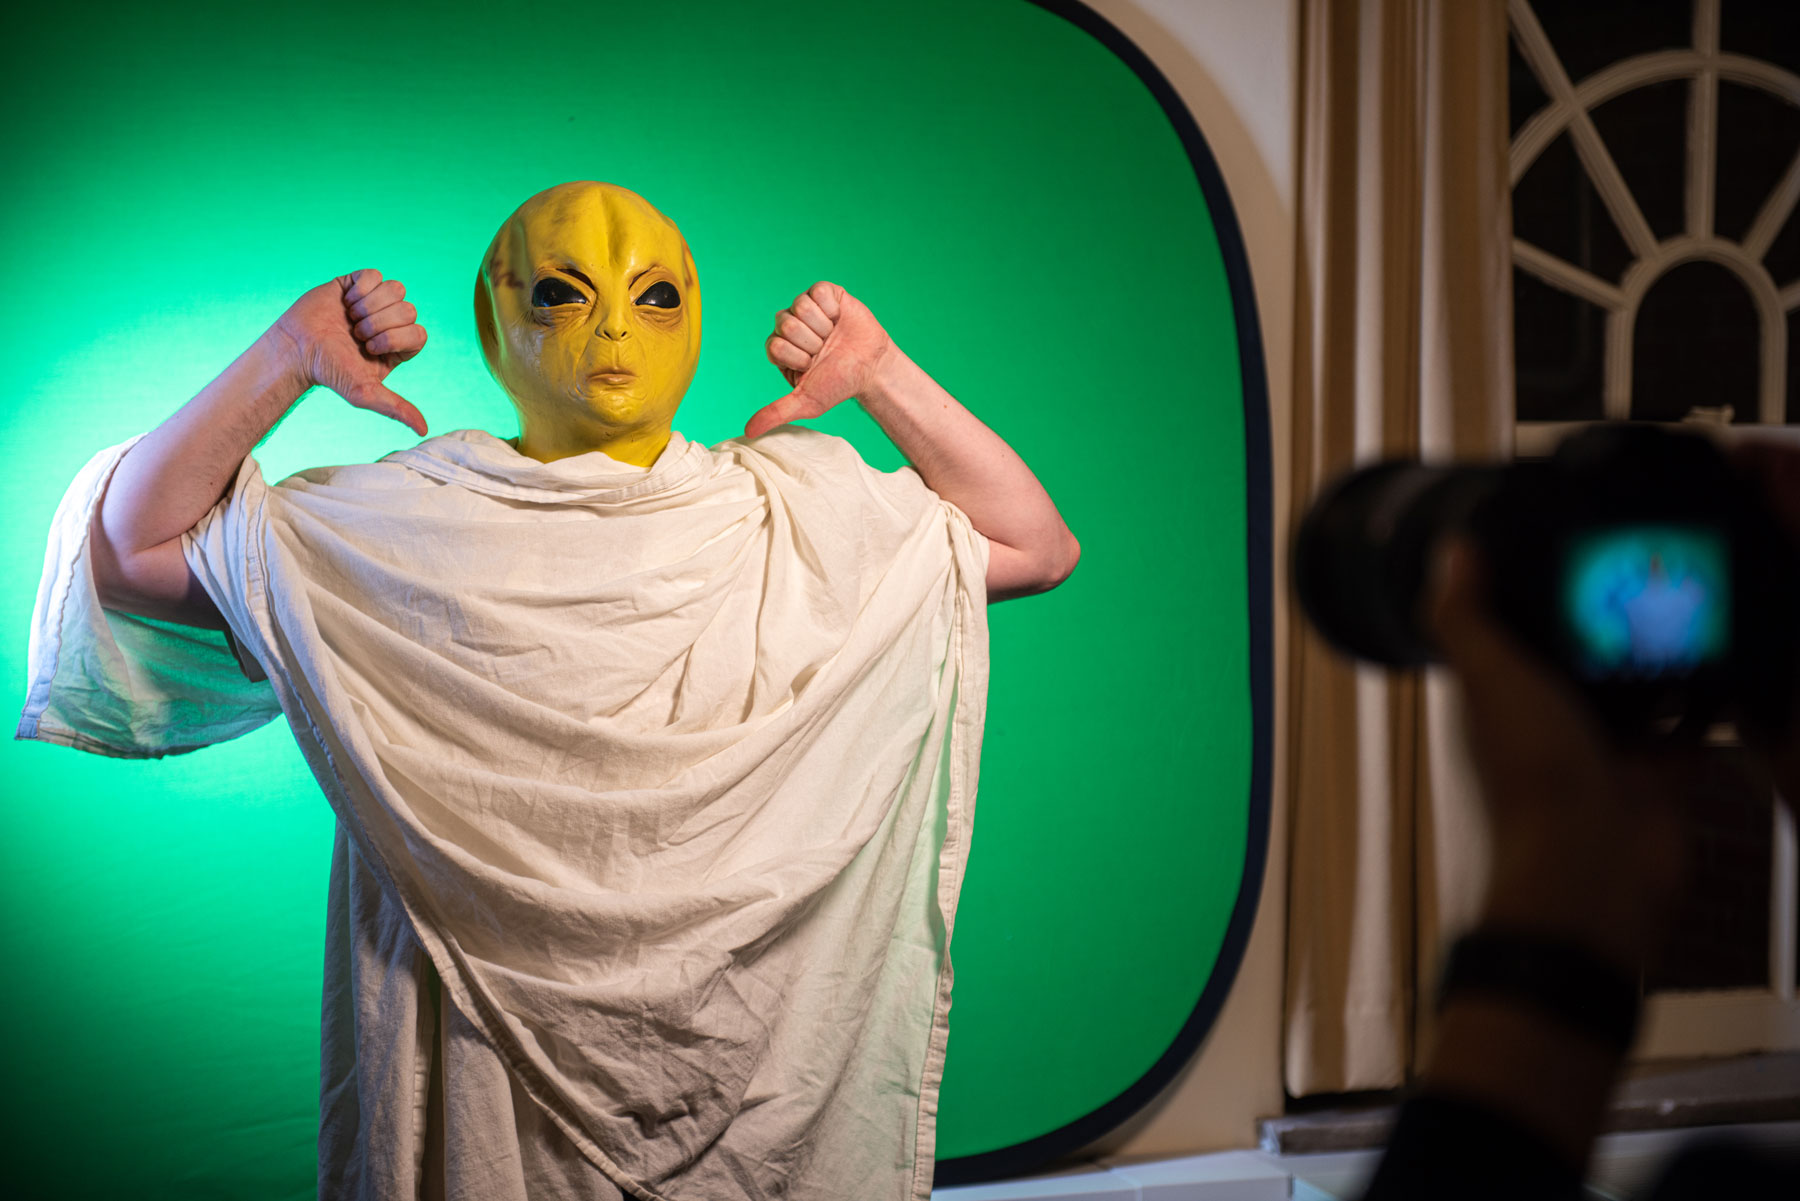 A person in an alien mask poses in front of a video green screen